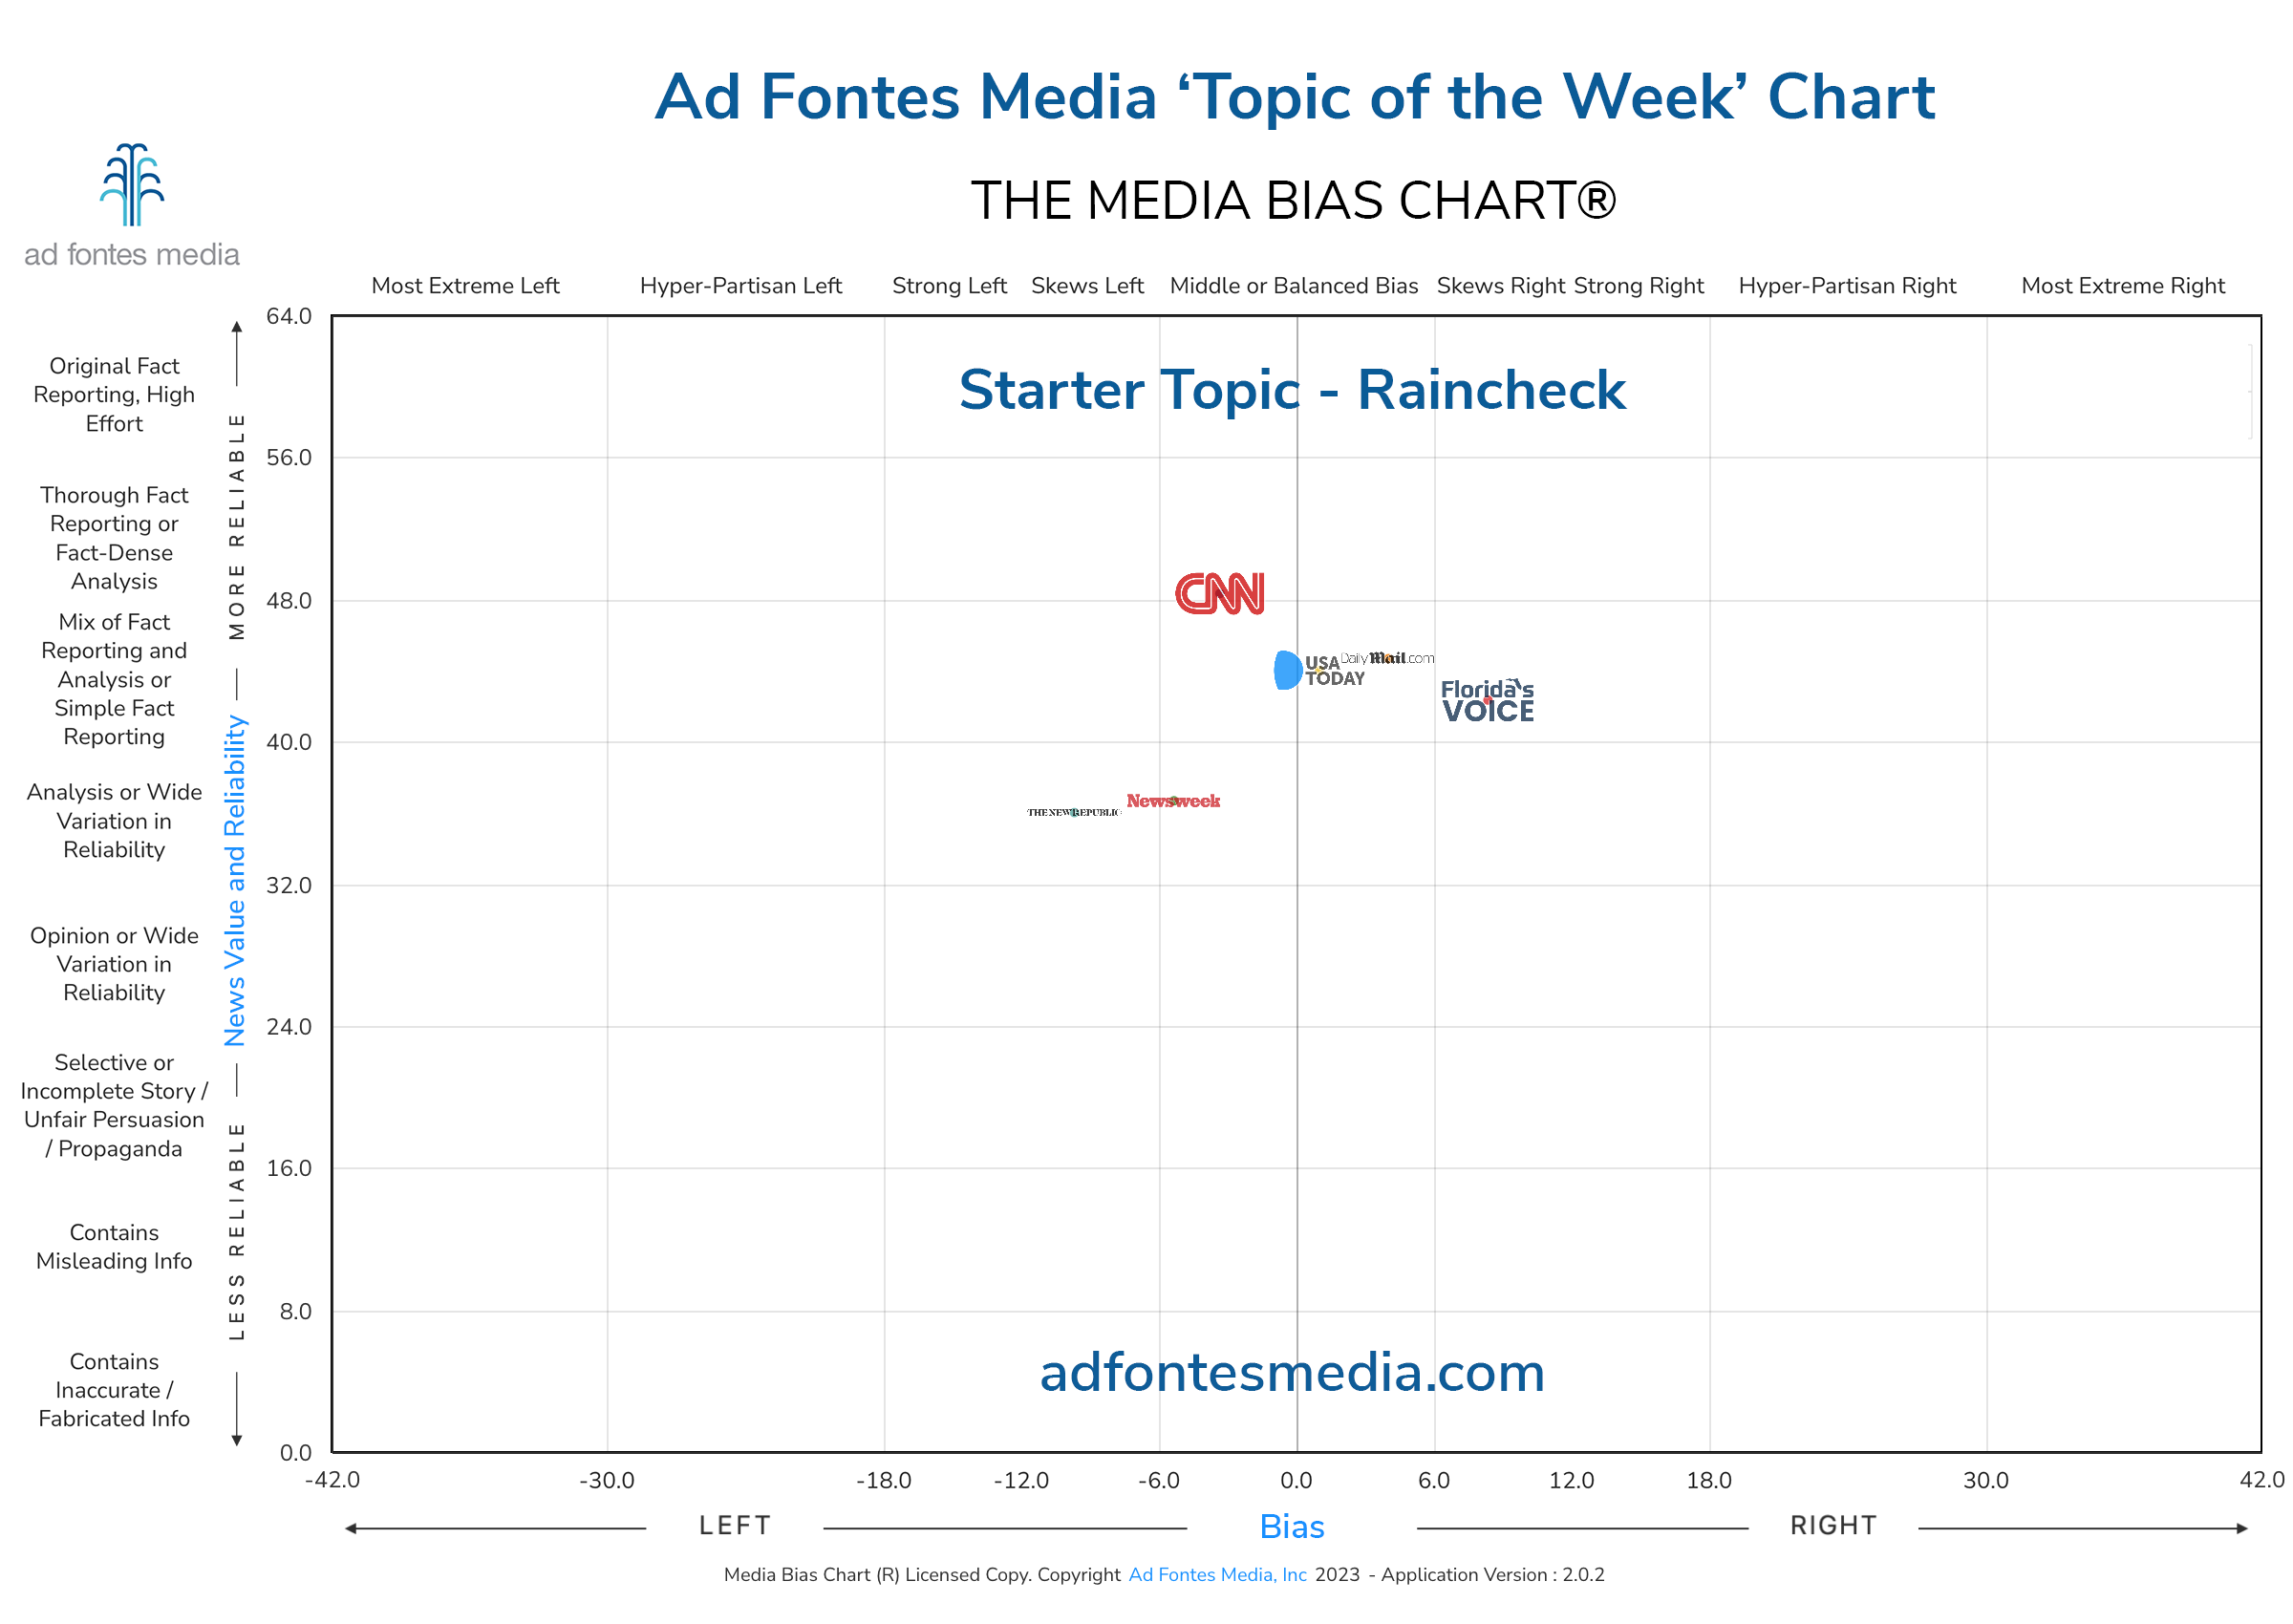 Scores of the Raincheck articles on the chart